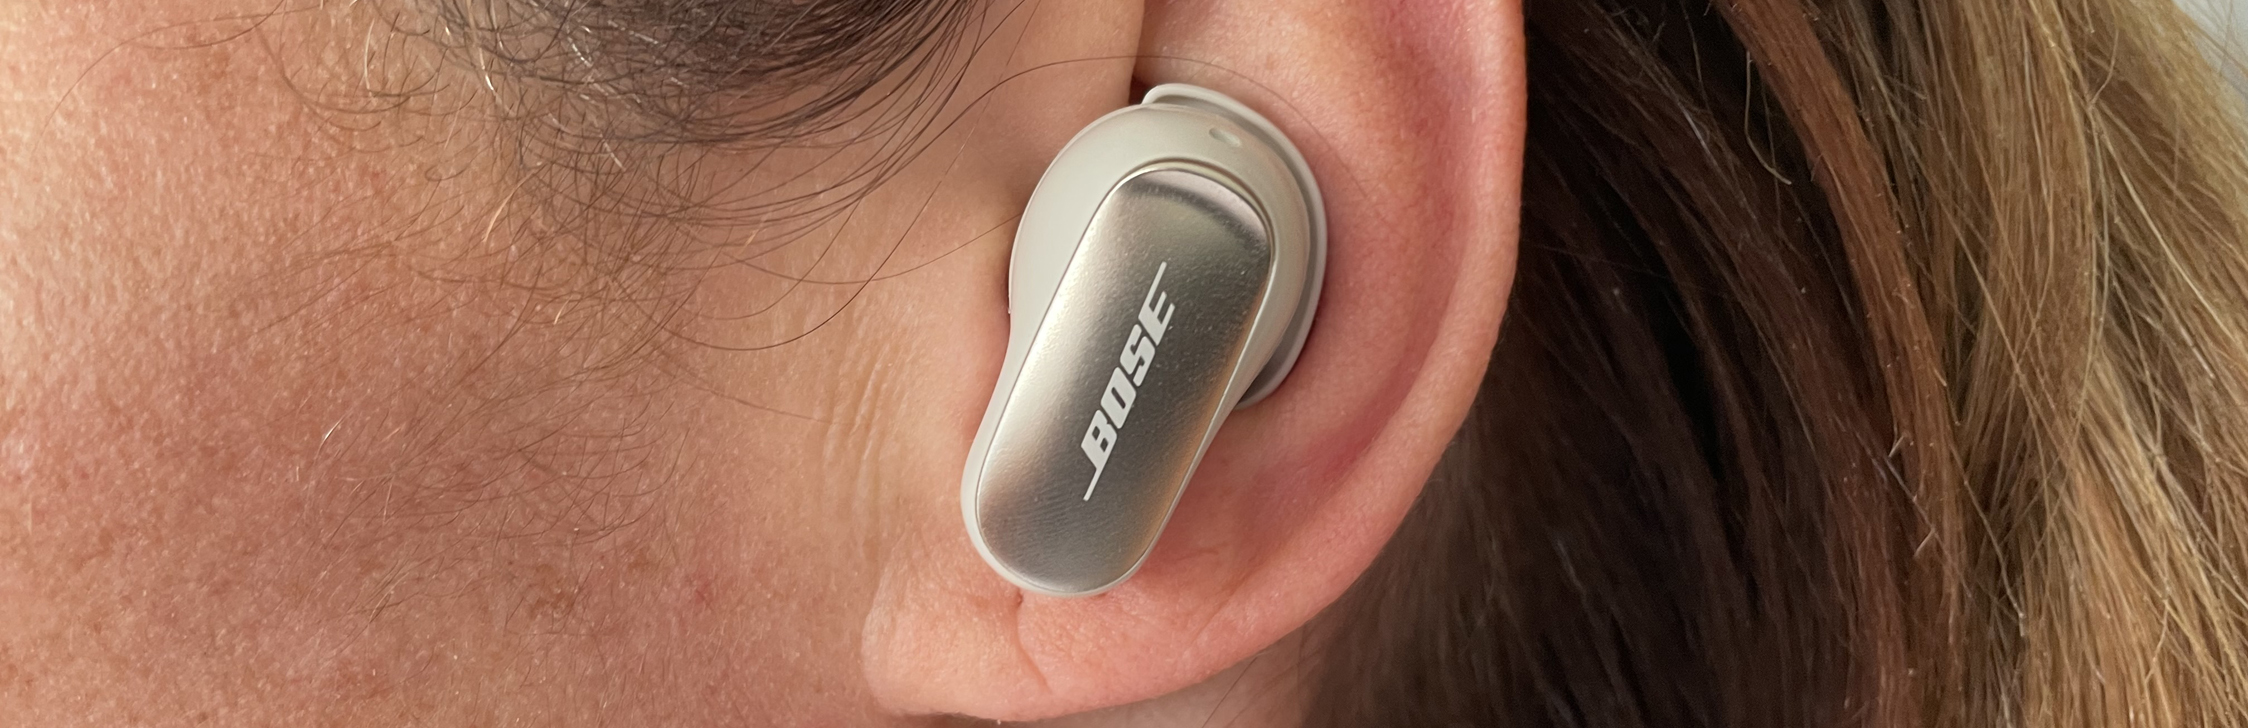 A pinnacle in sound: STACK's Bose QuietComfort Ultra Earbuds